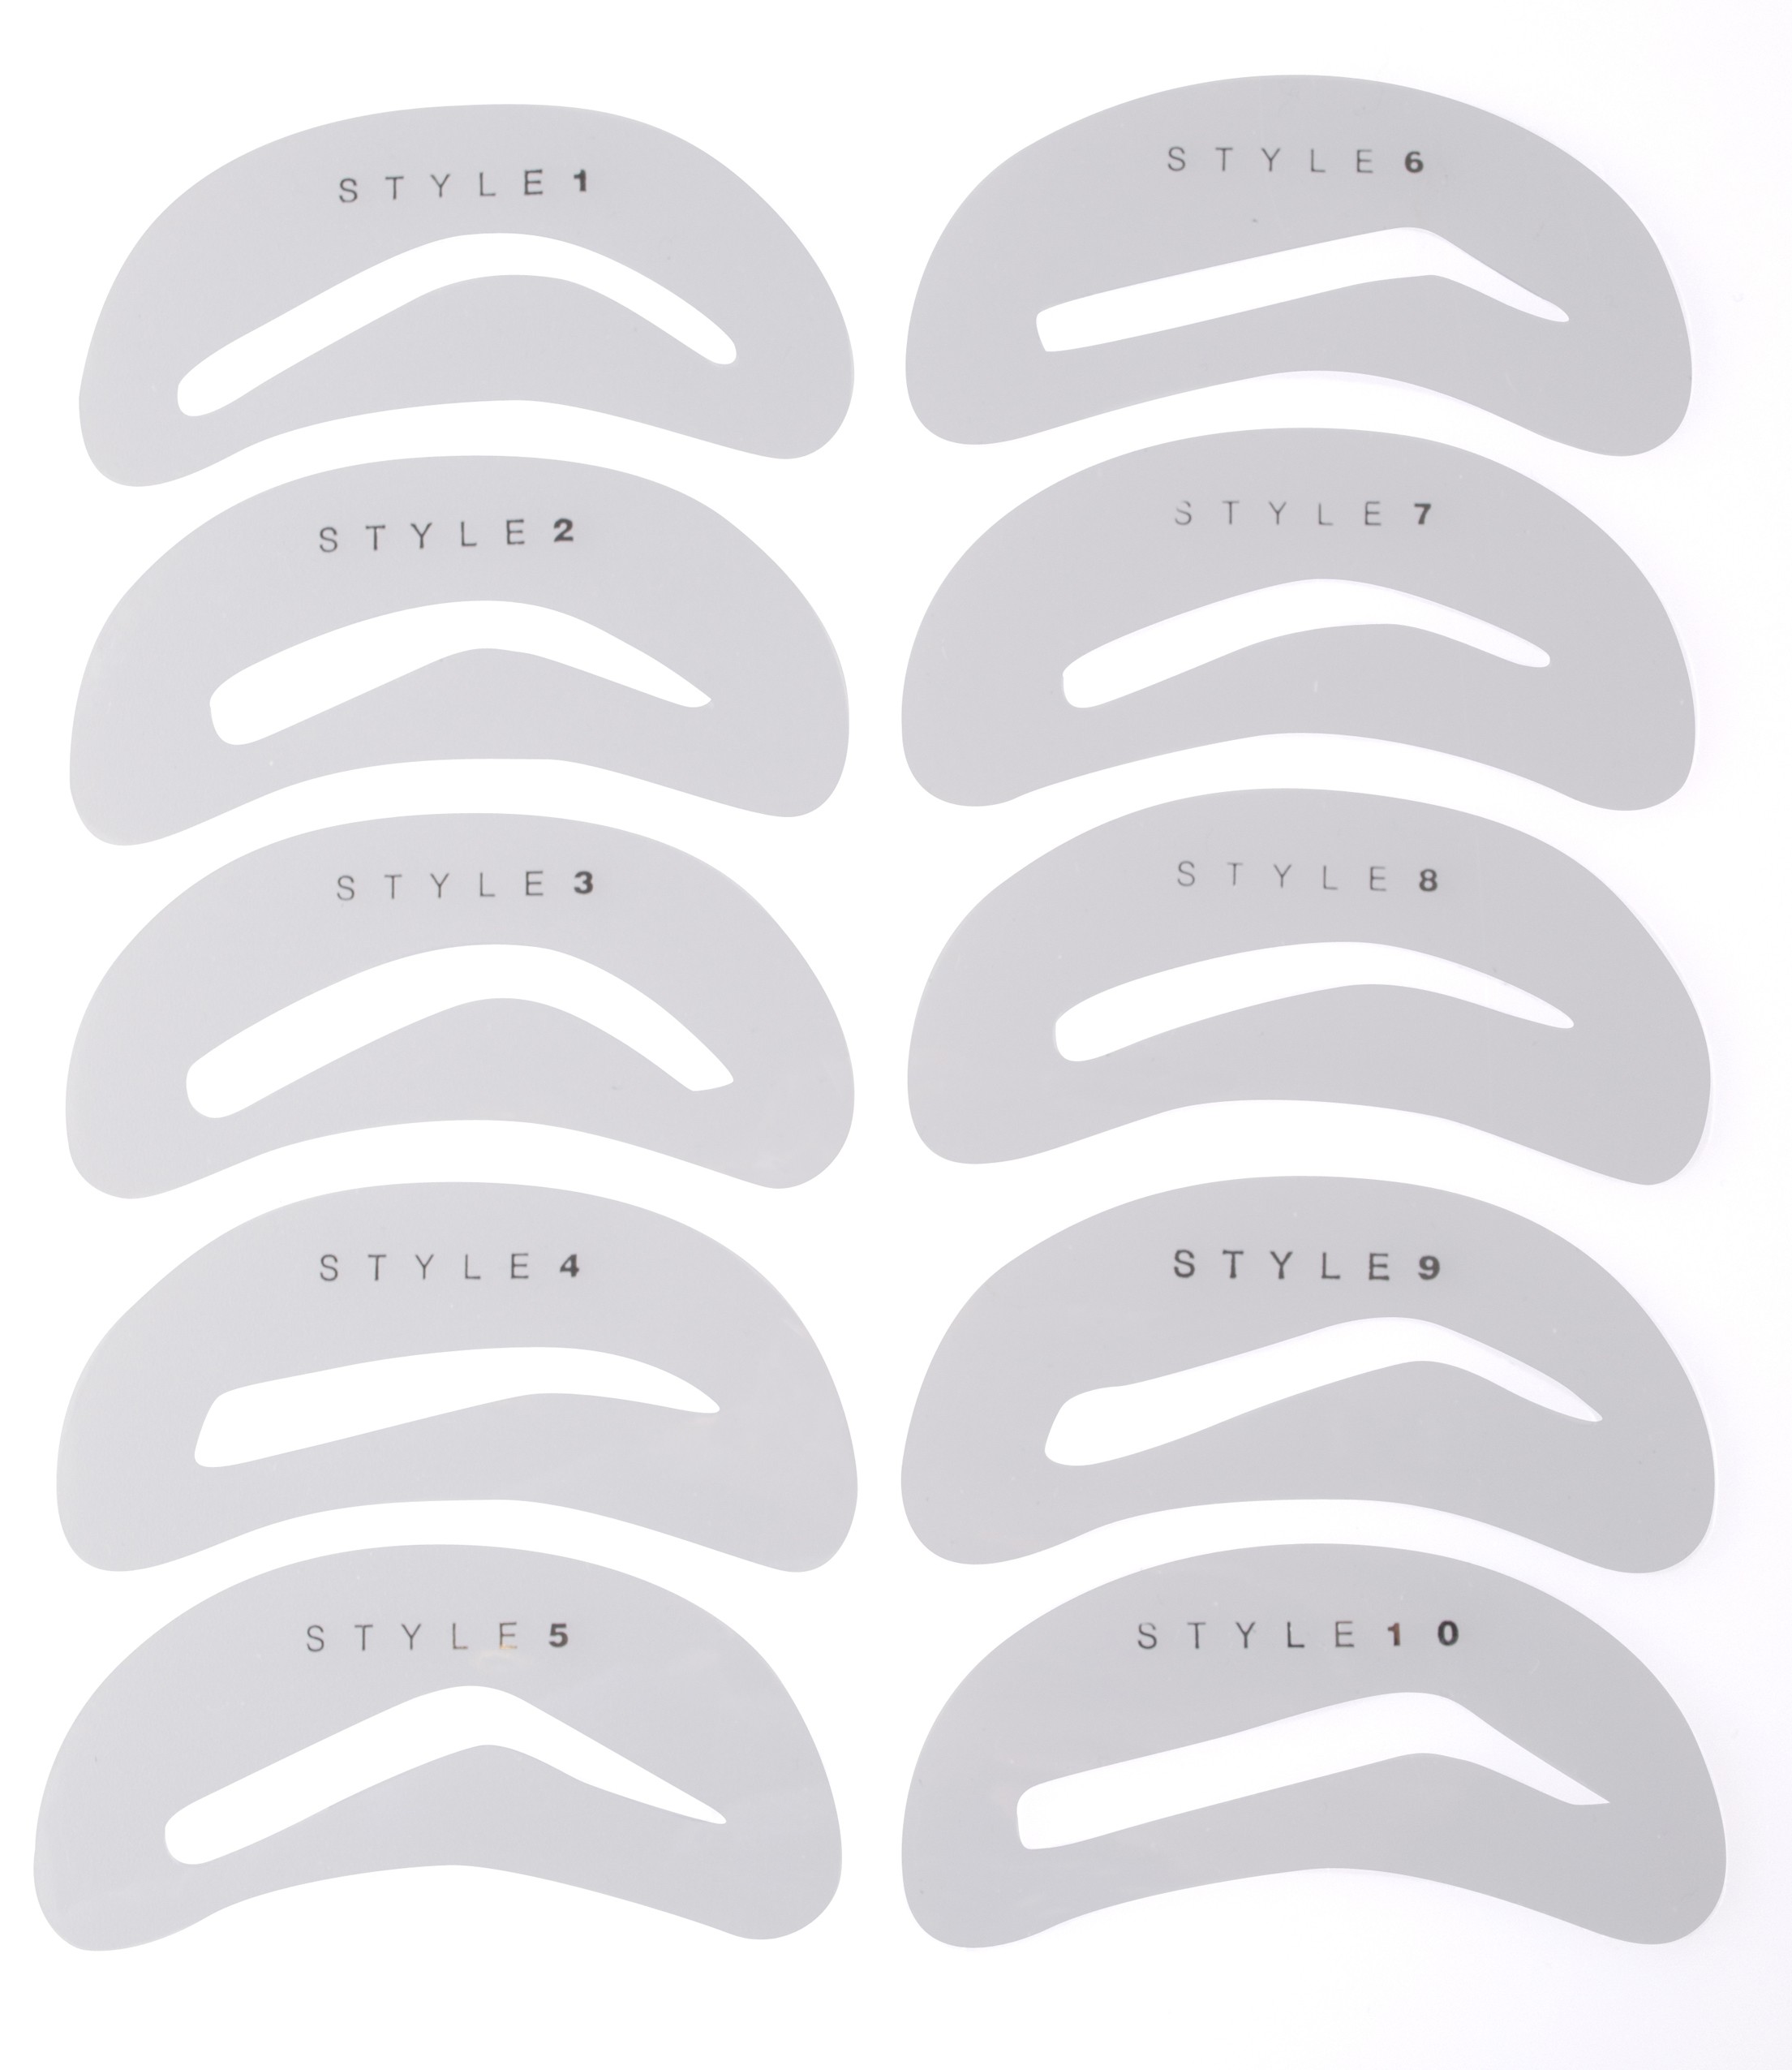 6-best-images-of-free-printable-eyebrow-stencils-kit-free-printable-eyebrow-stencil-printable